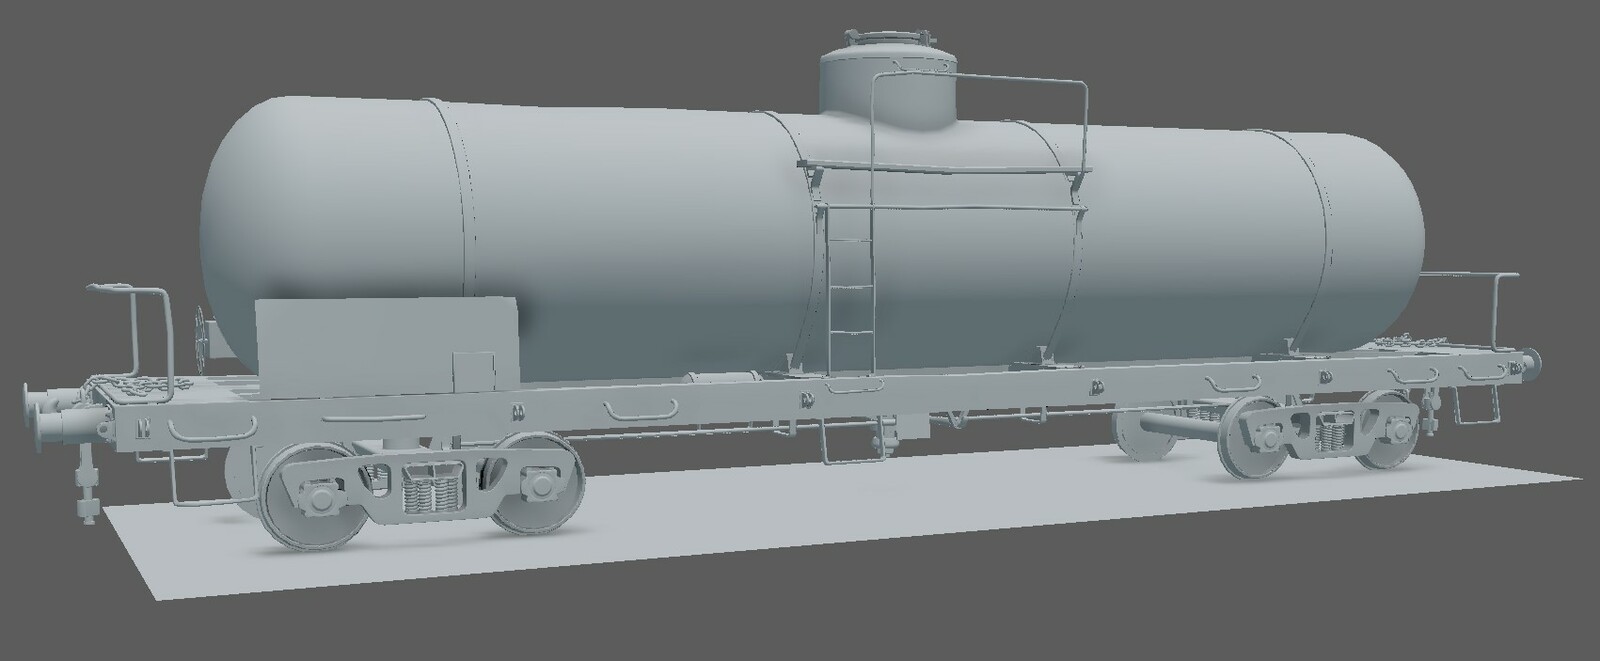 The model before I'd decided to change the direction of the project.